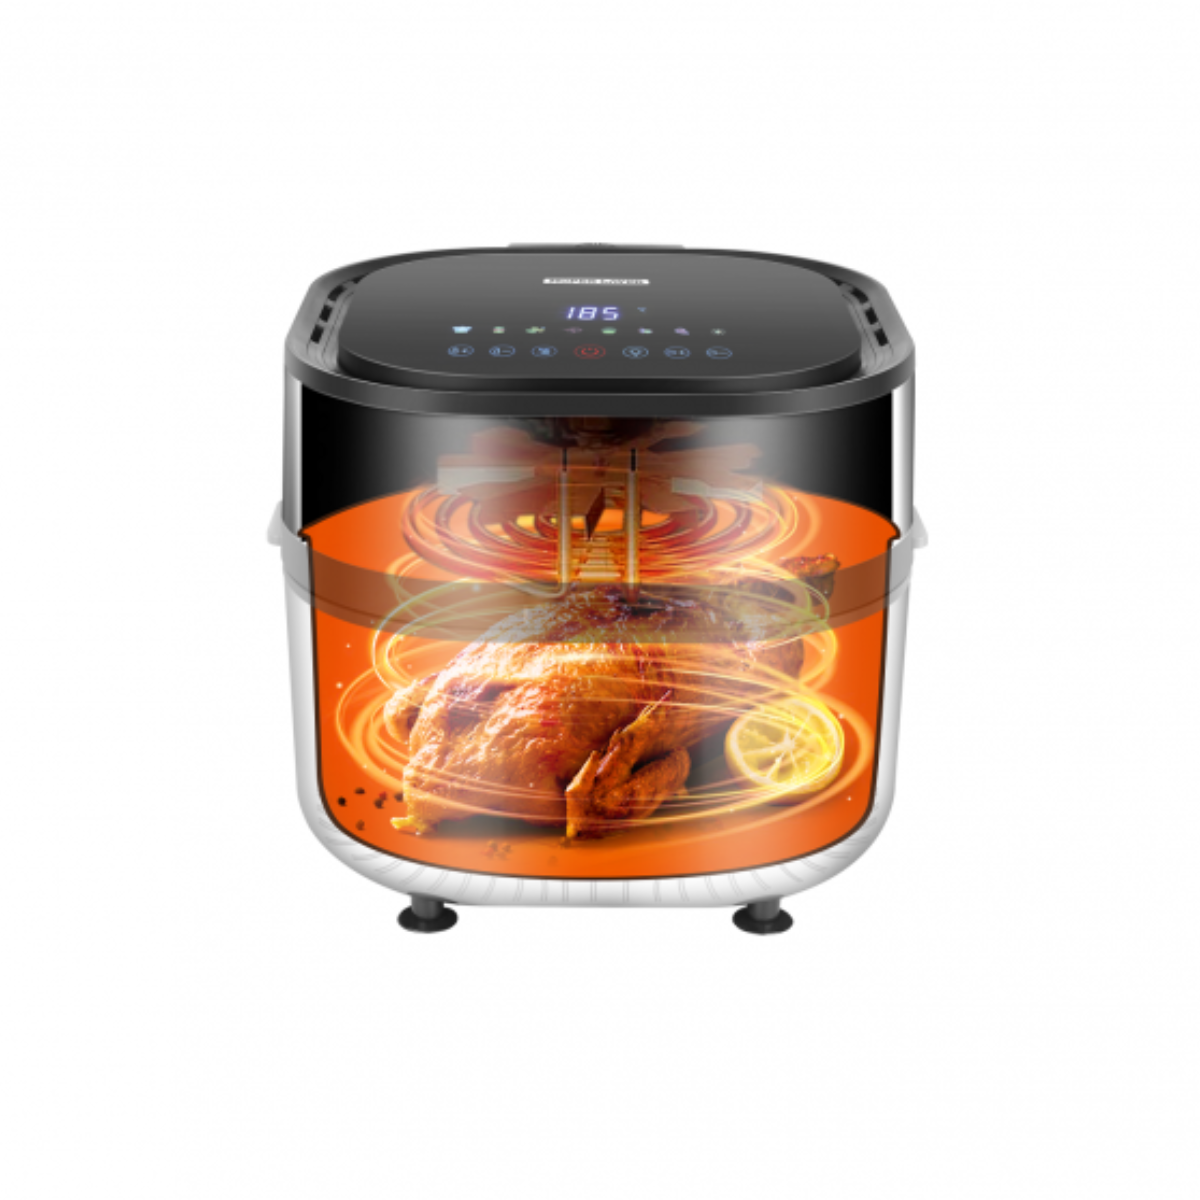 Spatial structure of air fryer